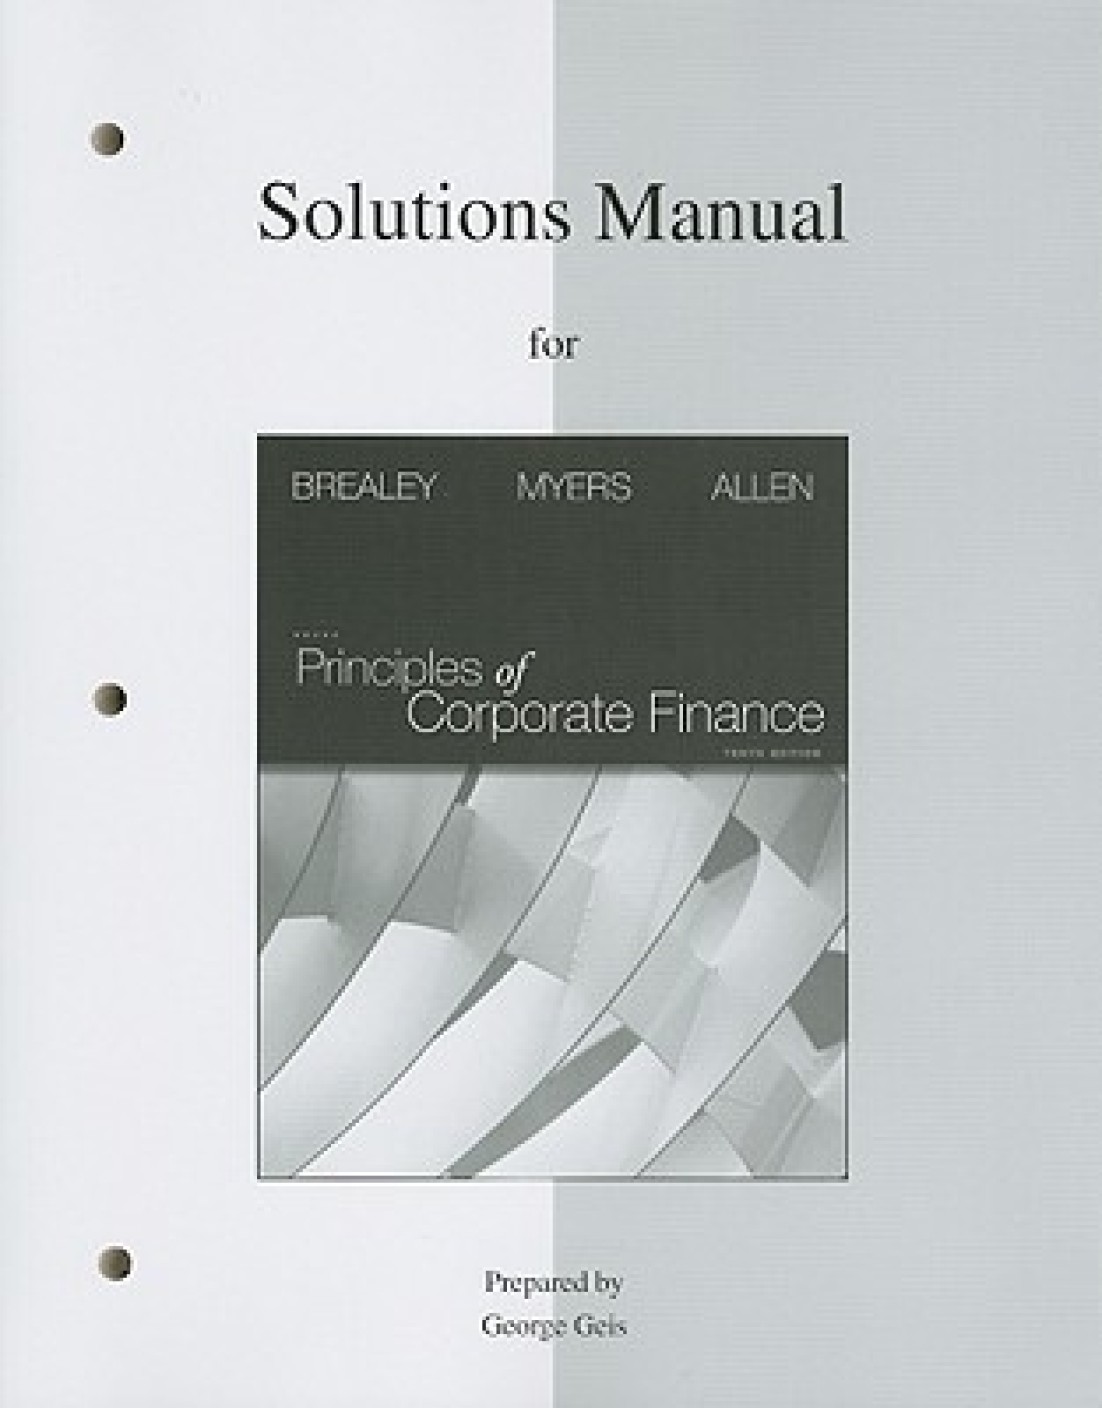 investments 10th edition solution pdf